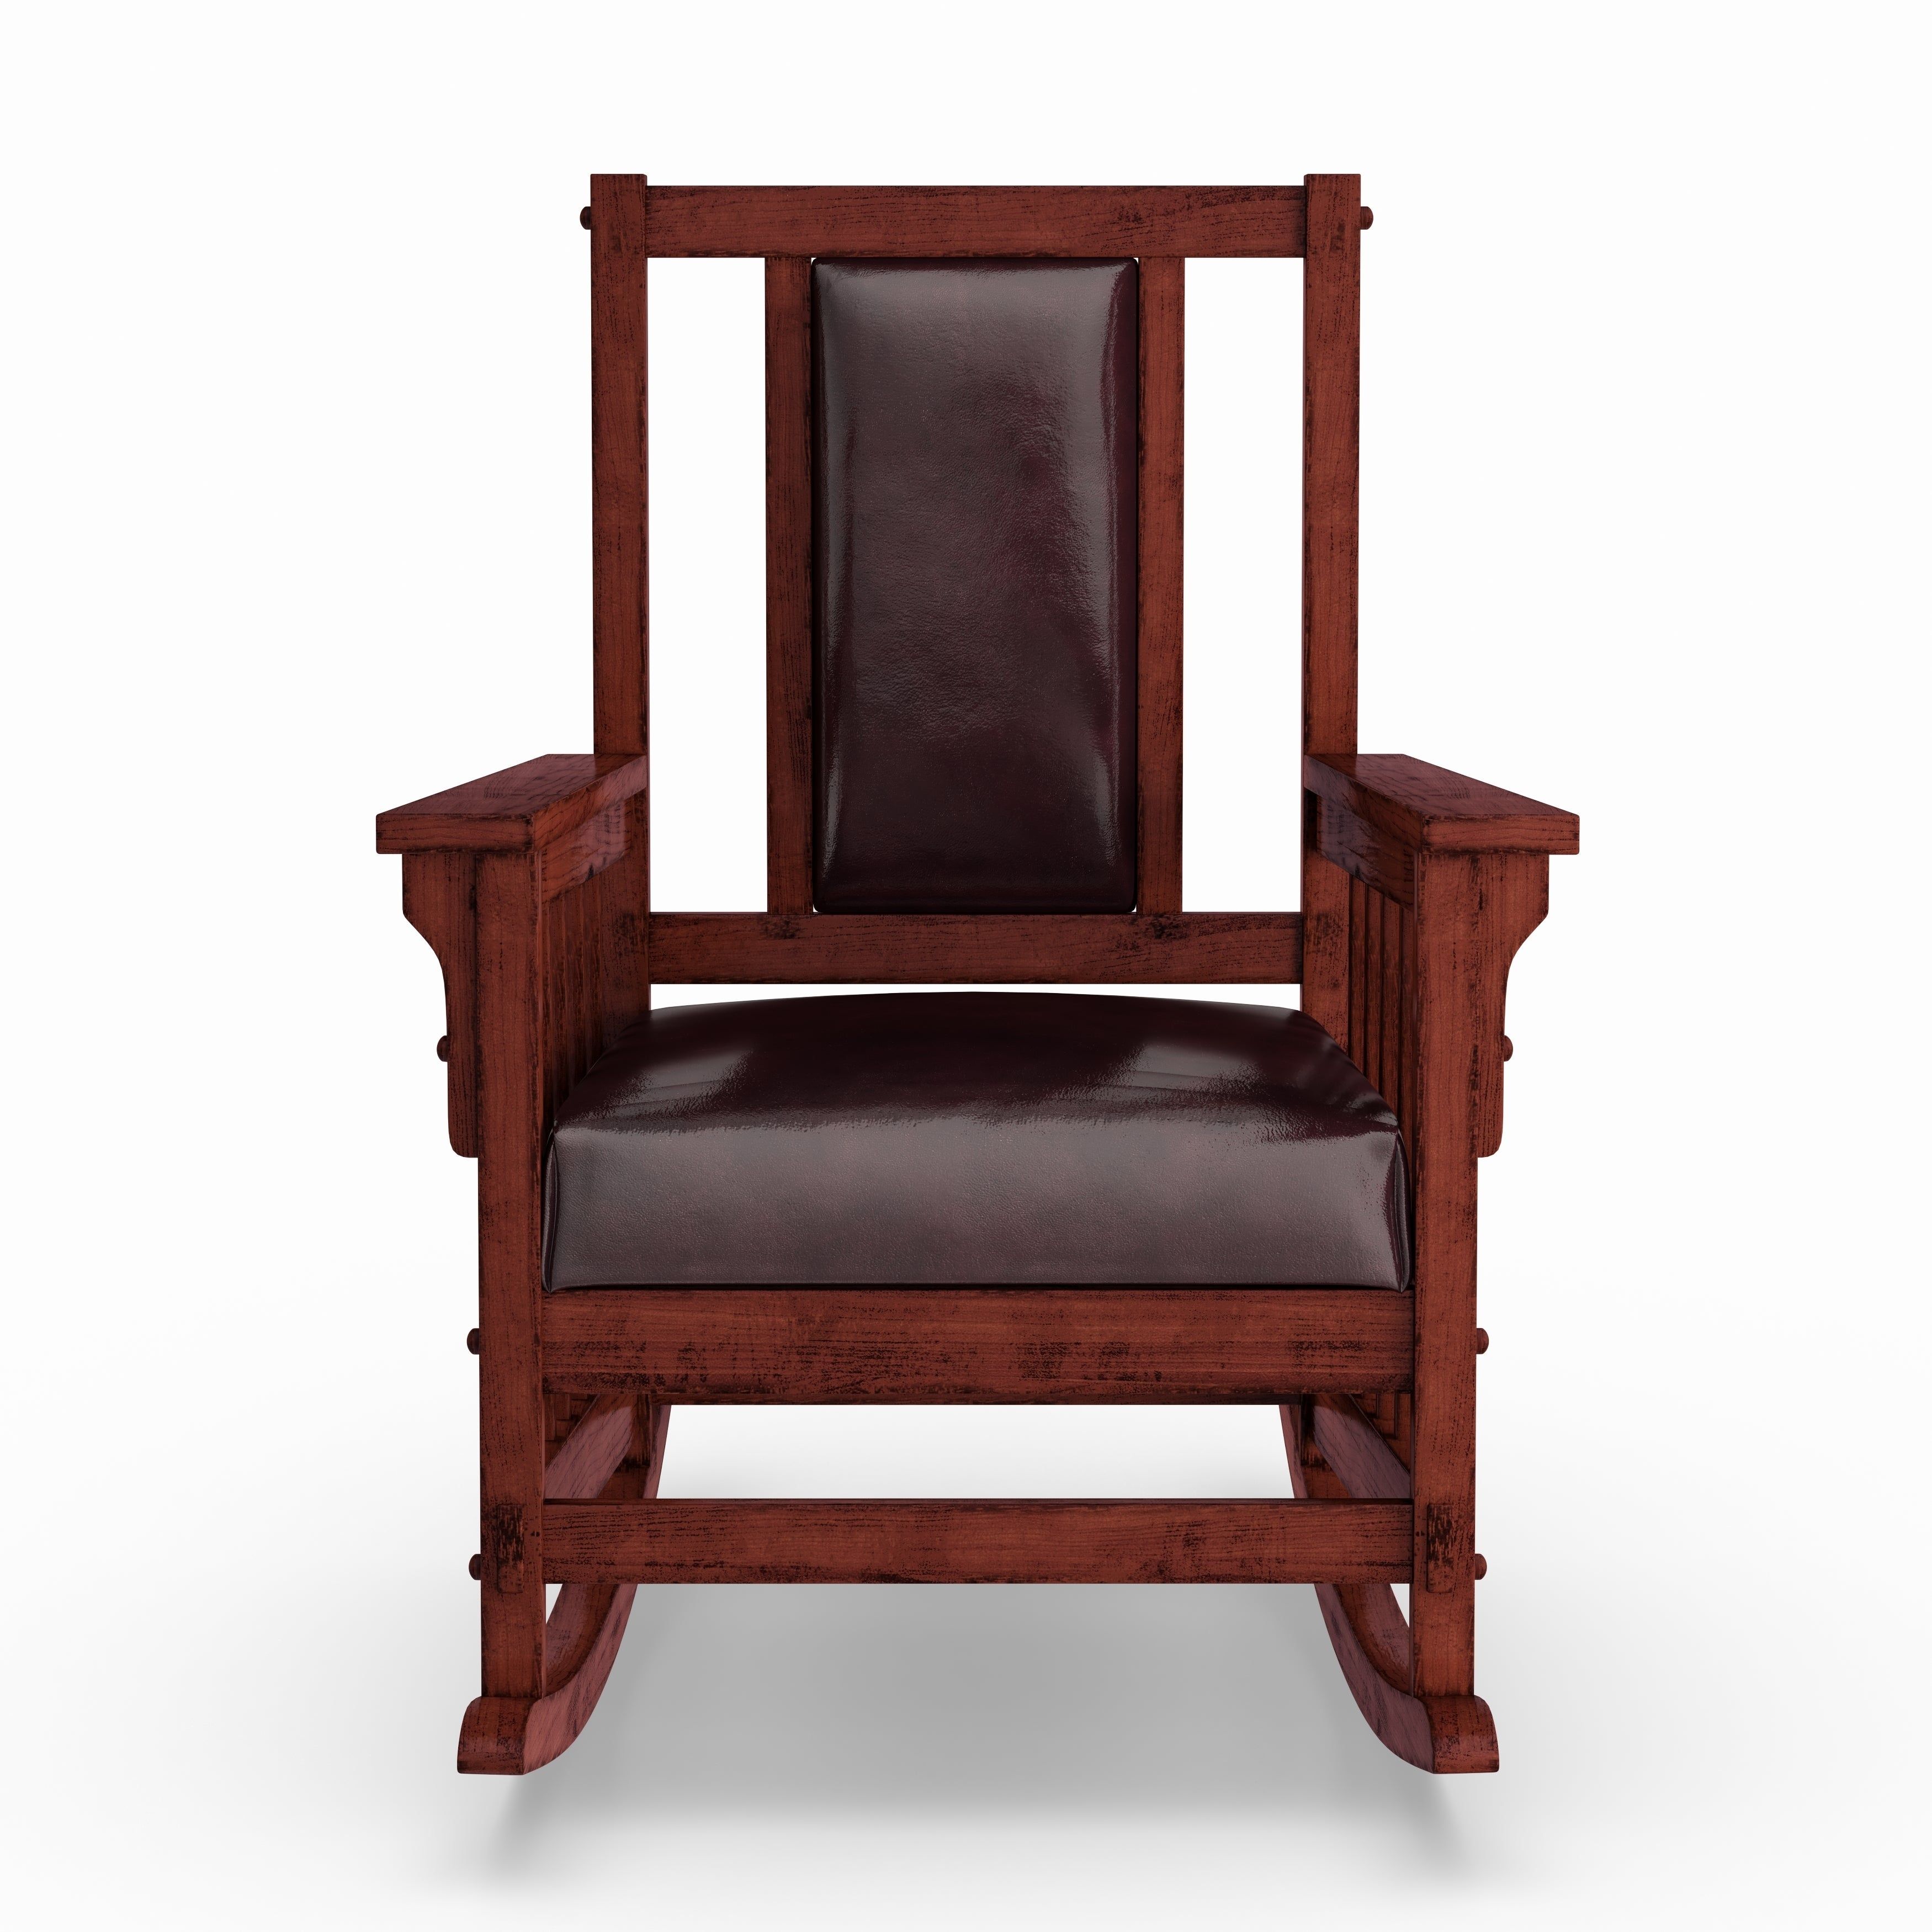 Copper Grove Mesa Verde Dark Oak Wooden Padded Faux Leather Rocking Chair Intended For Dark Oak Wooden Padded Faux Leather Rocking Chairs (Photo 3 of 20)